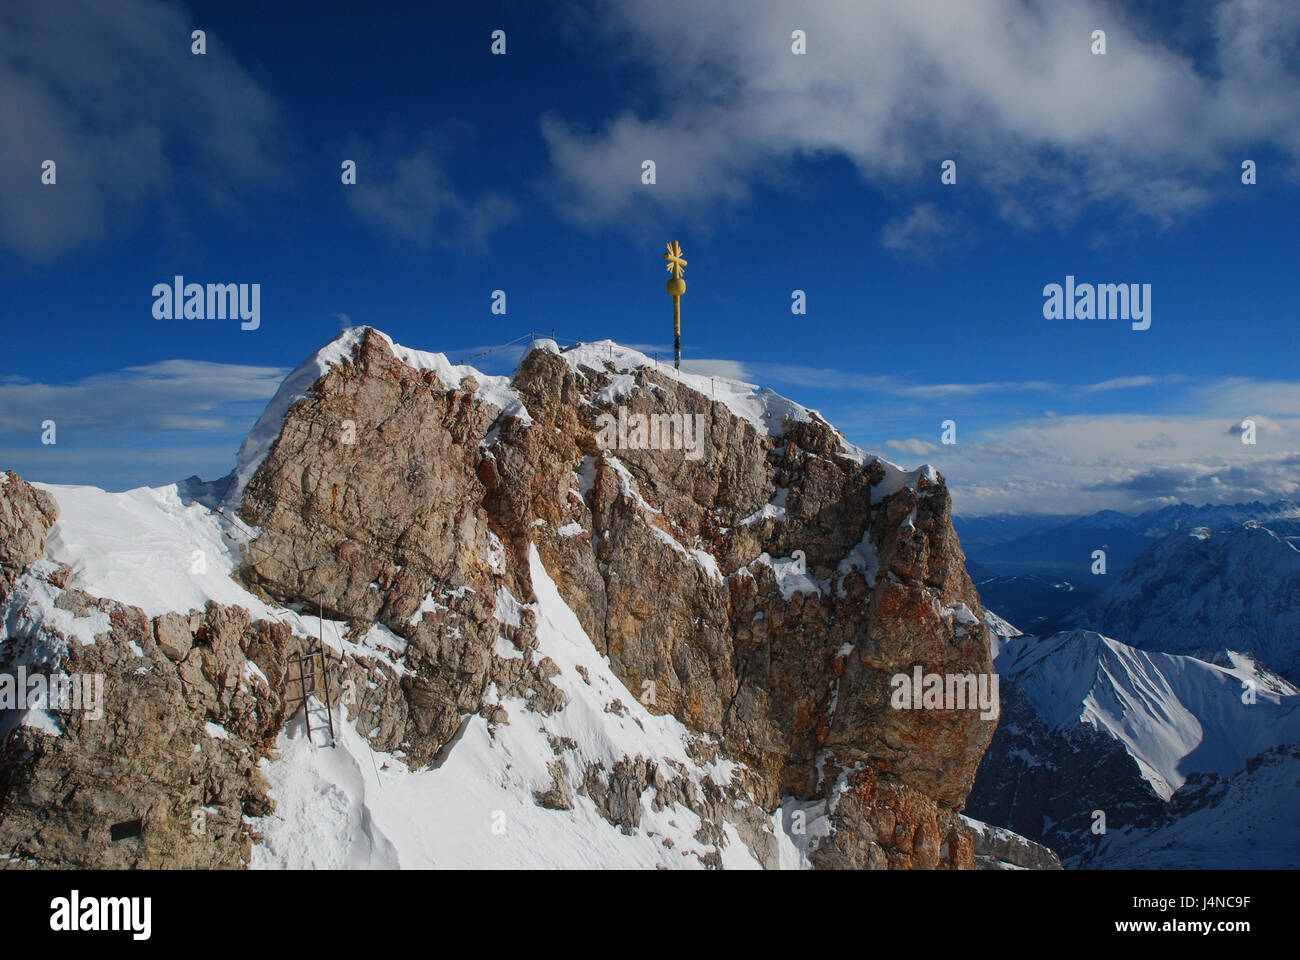 Germany, Bavaria, Zugspitze, summits, cross, Alpine panorama, cloudy sky, Upper Bavaria, alps, mountains, mountains, Zugspitze summits, east summits, golden, summit cross, scenery, snow, mountain panorama, Gipelpanorama, place of interest, view, , nobody, loneliness, silence, outside, Stock Photo